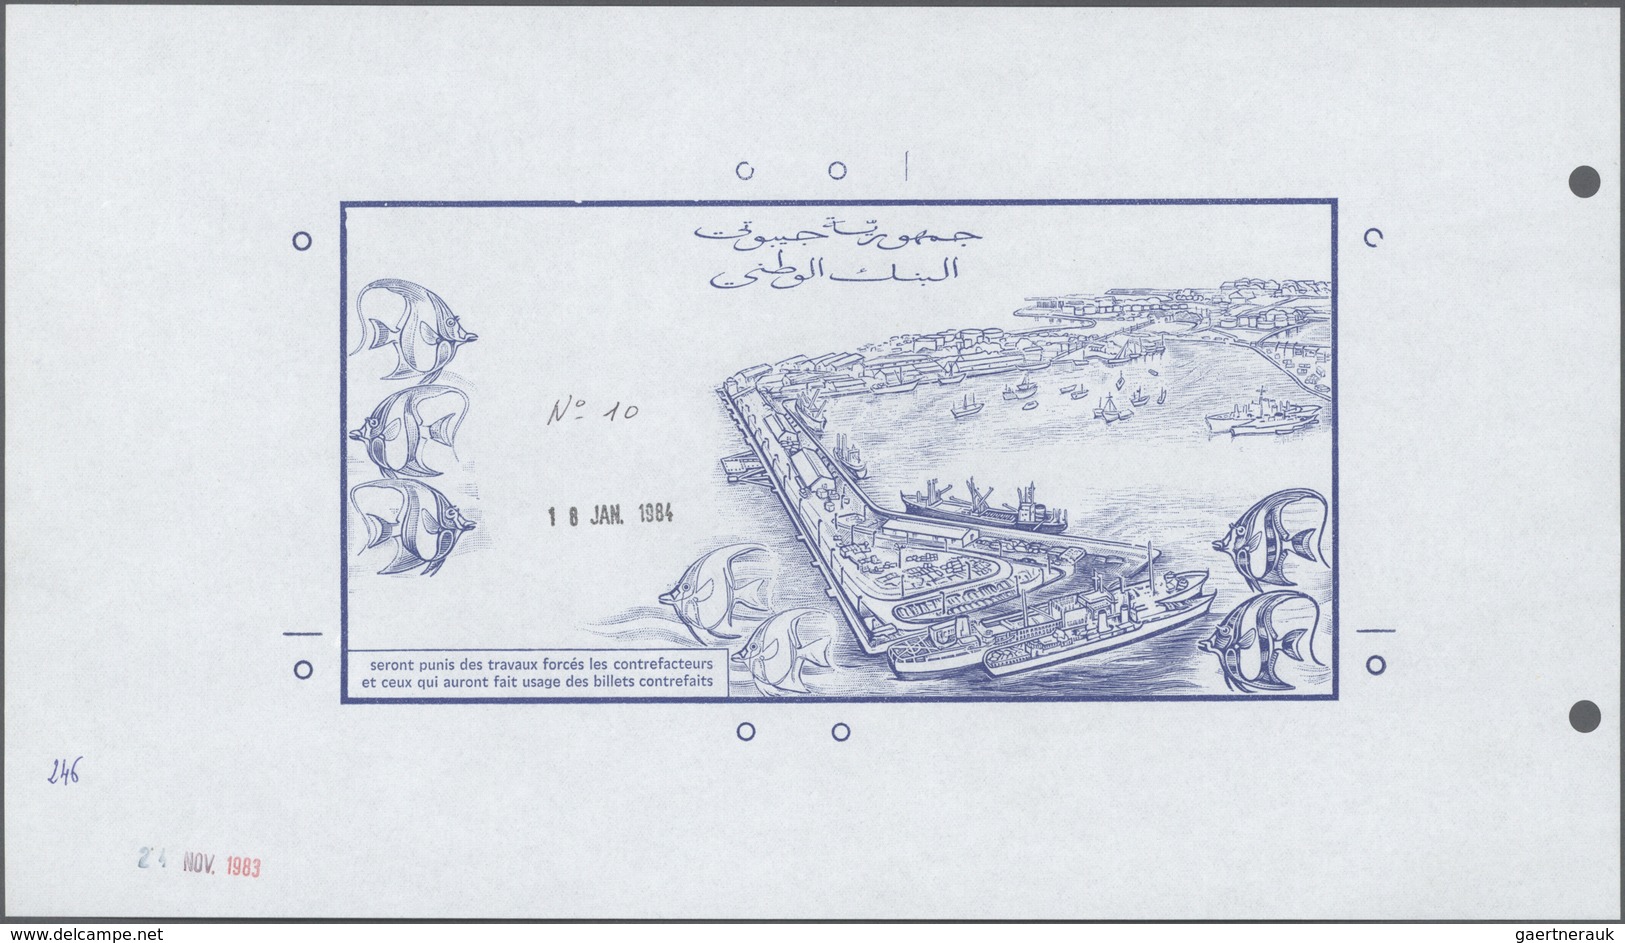 Djibouti / Dschibuti: Highly Rare Archival Back Proof Print Of The Banque De France For The 10.000 F - Gibuti